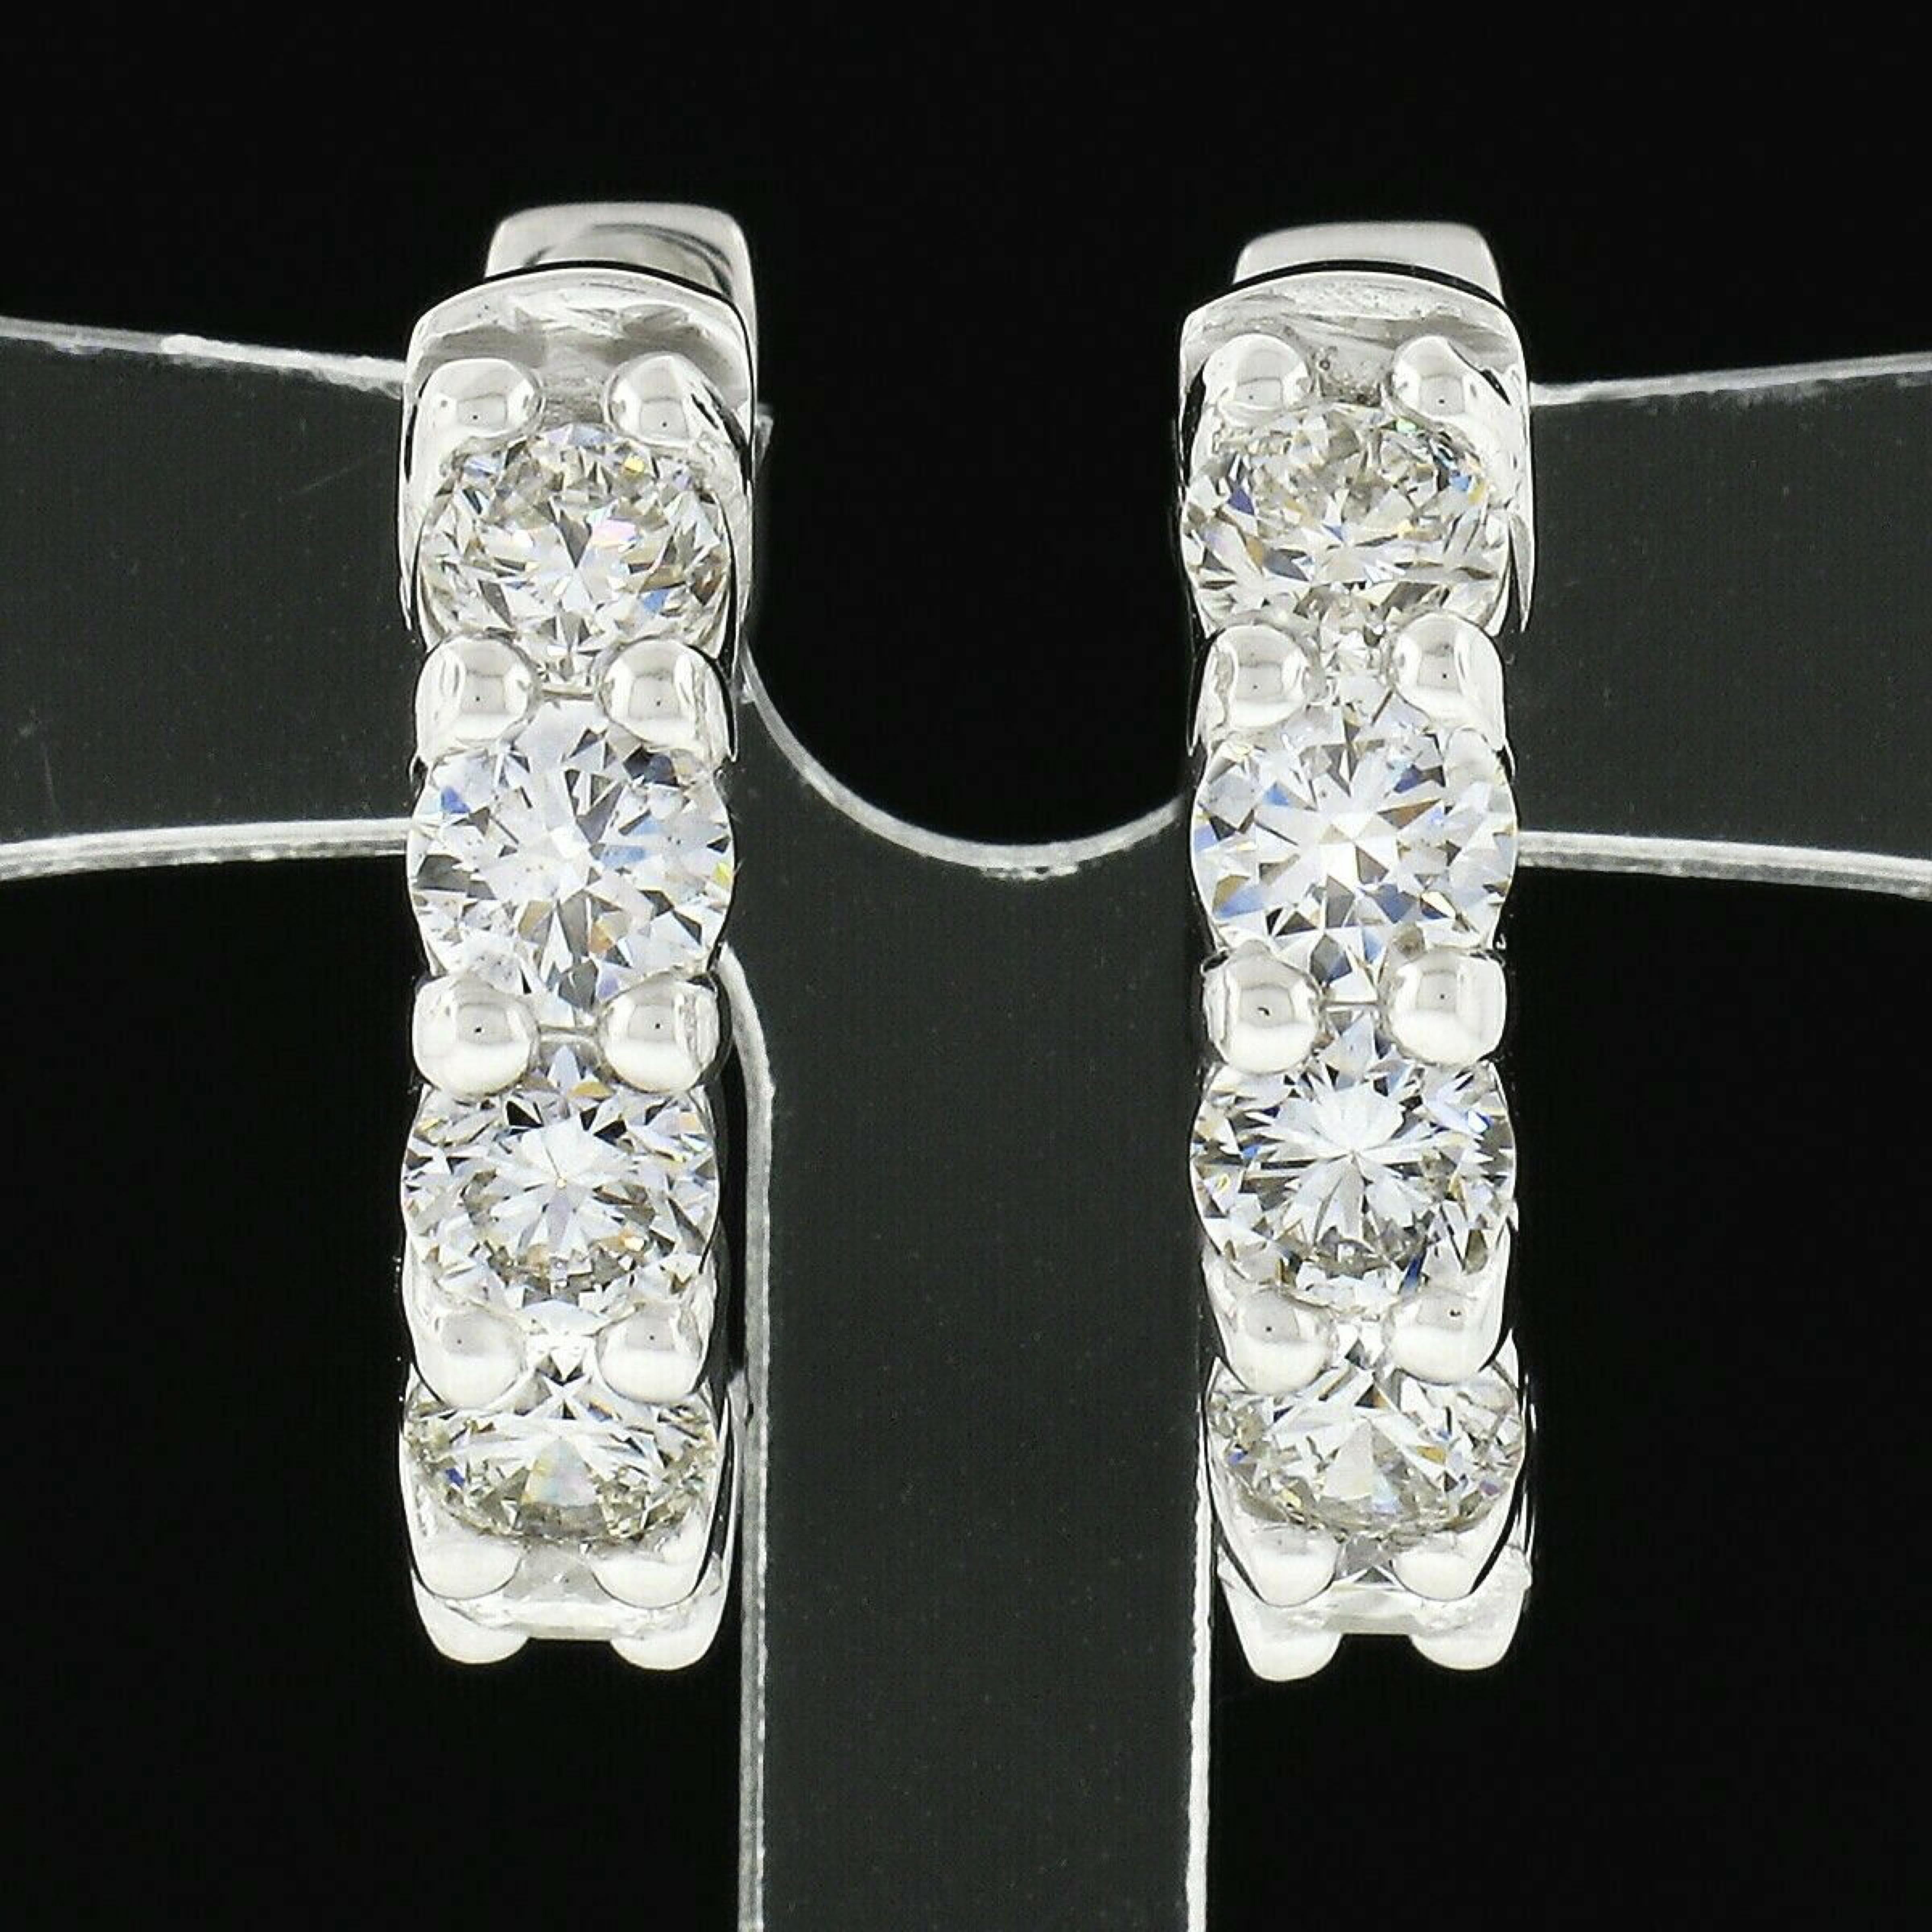 This elegant pair of hoop earrings was newly crafted in solid 14k white gold and features exactly 1.58 carats of super fine quality round brilliant cut diamonds. These fiery diamonds are neatly shared-prong set across the front side in sets of 5,